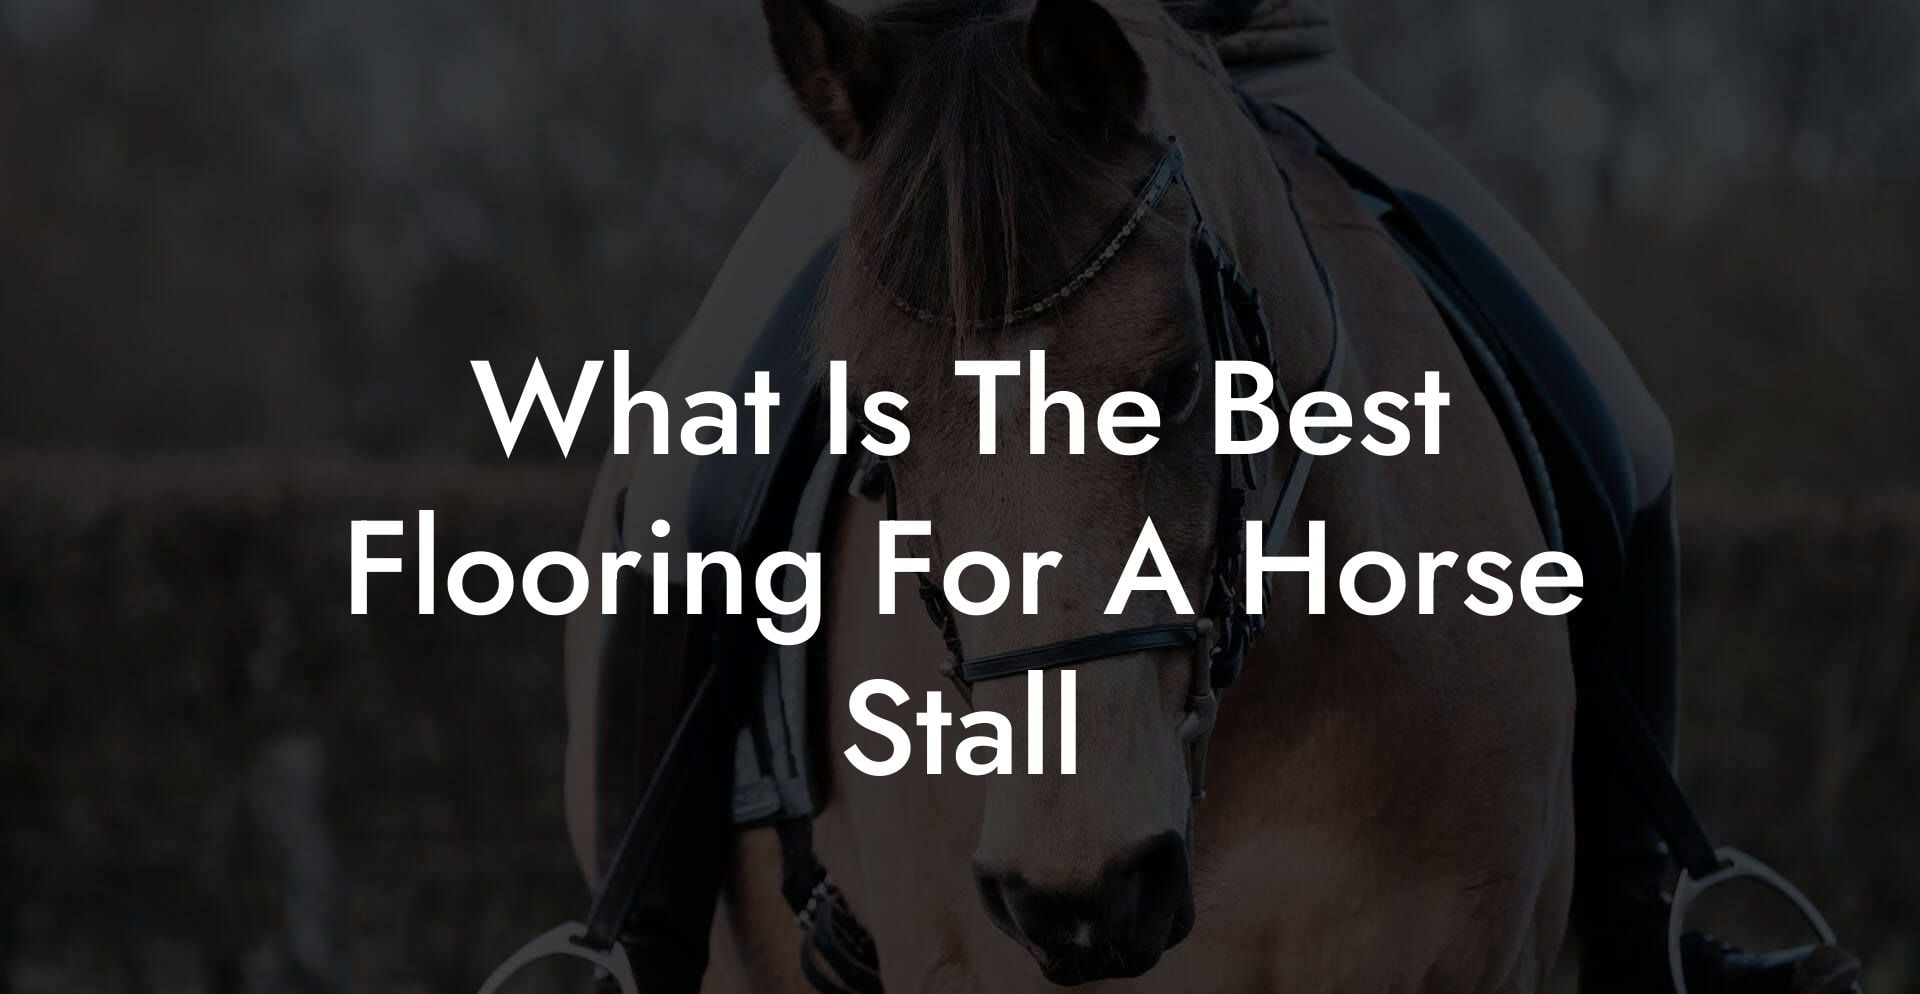 What Is The Best Flooring For A Horse Stall